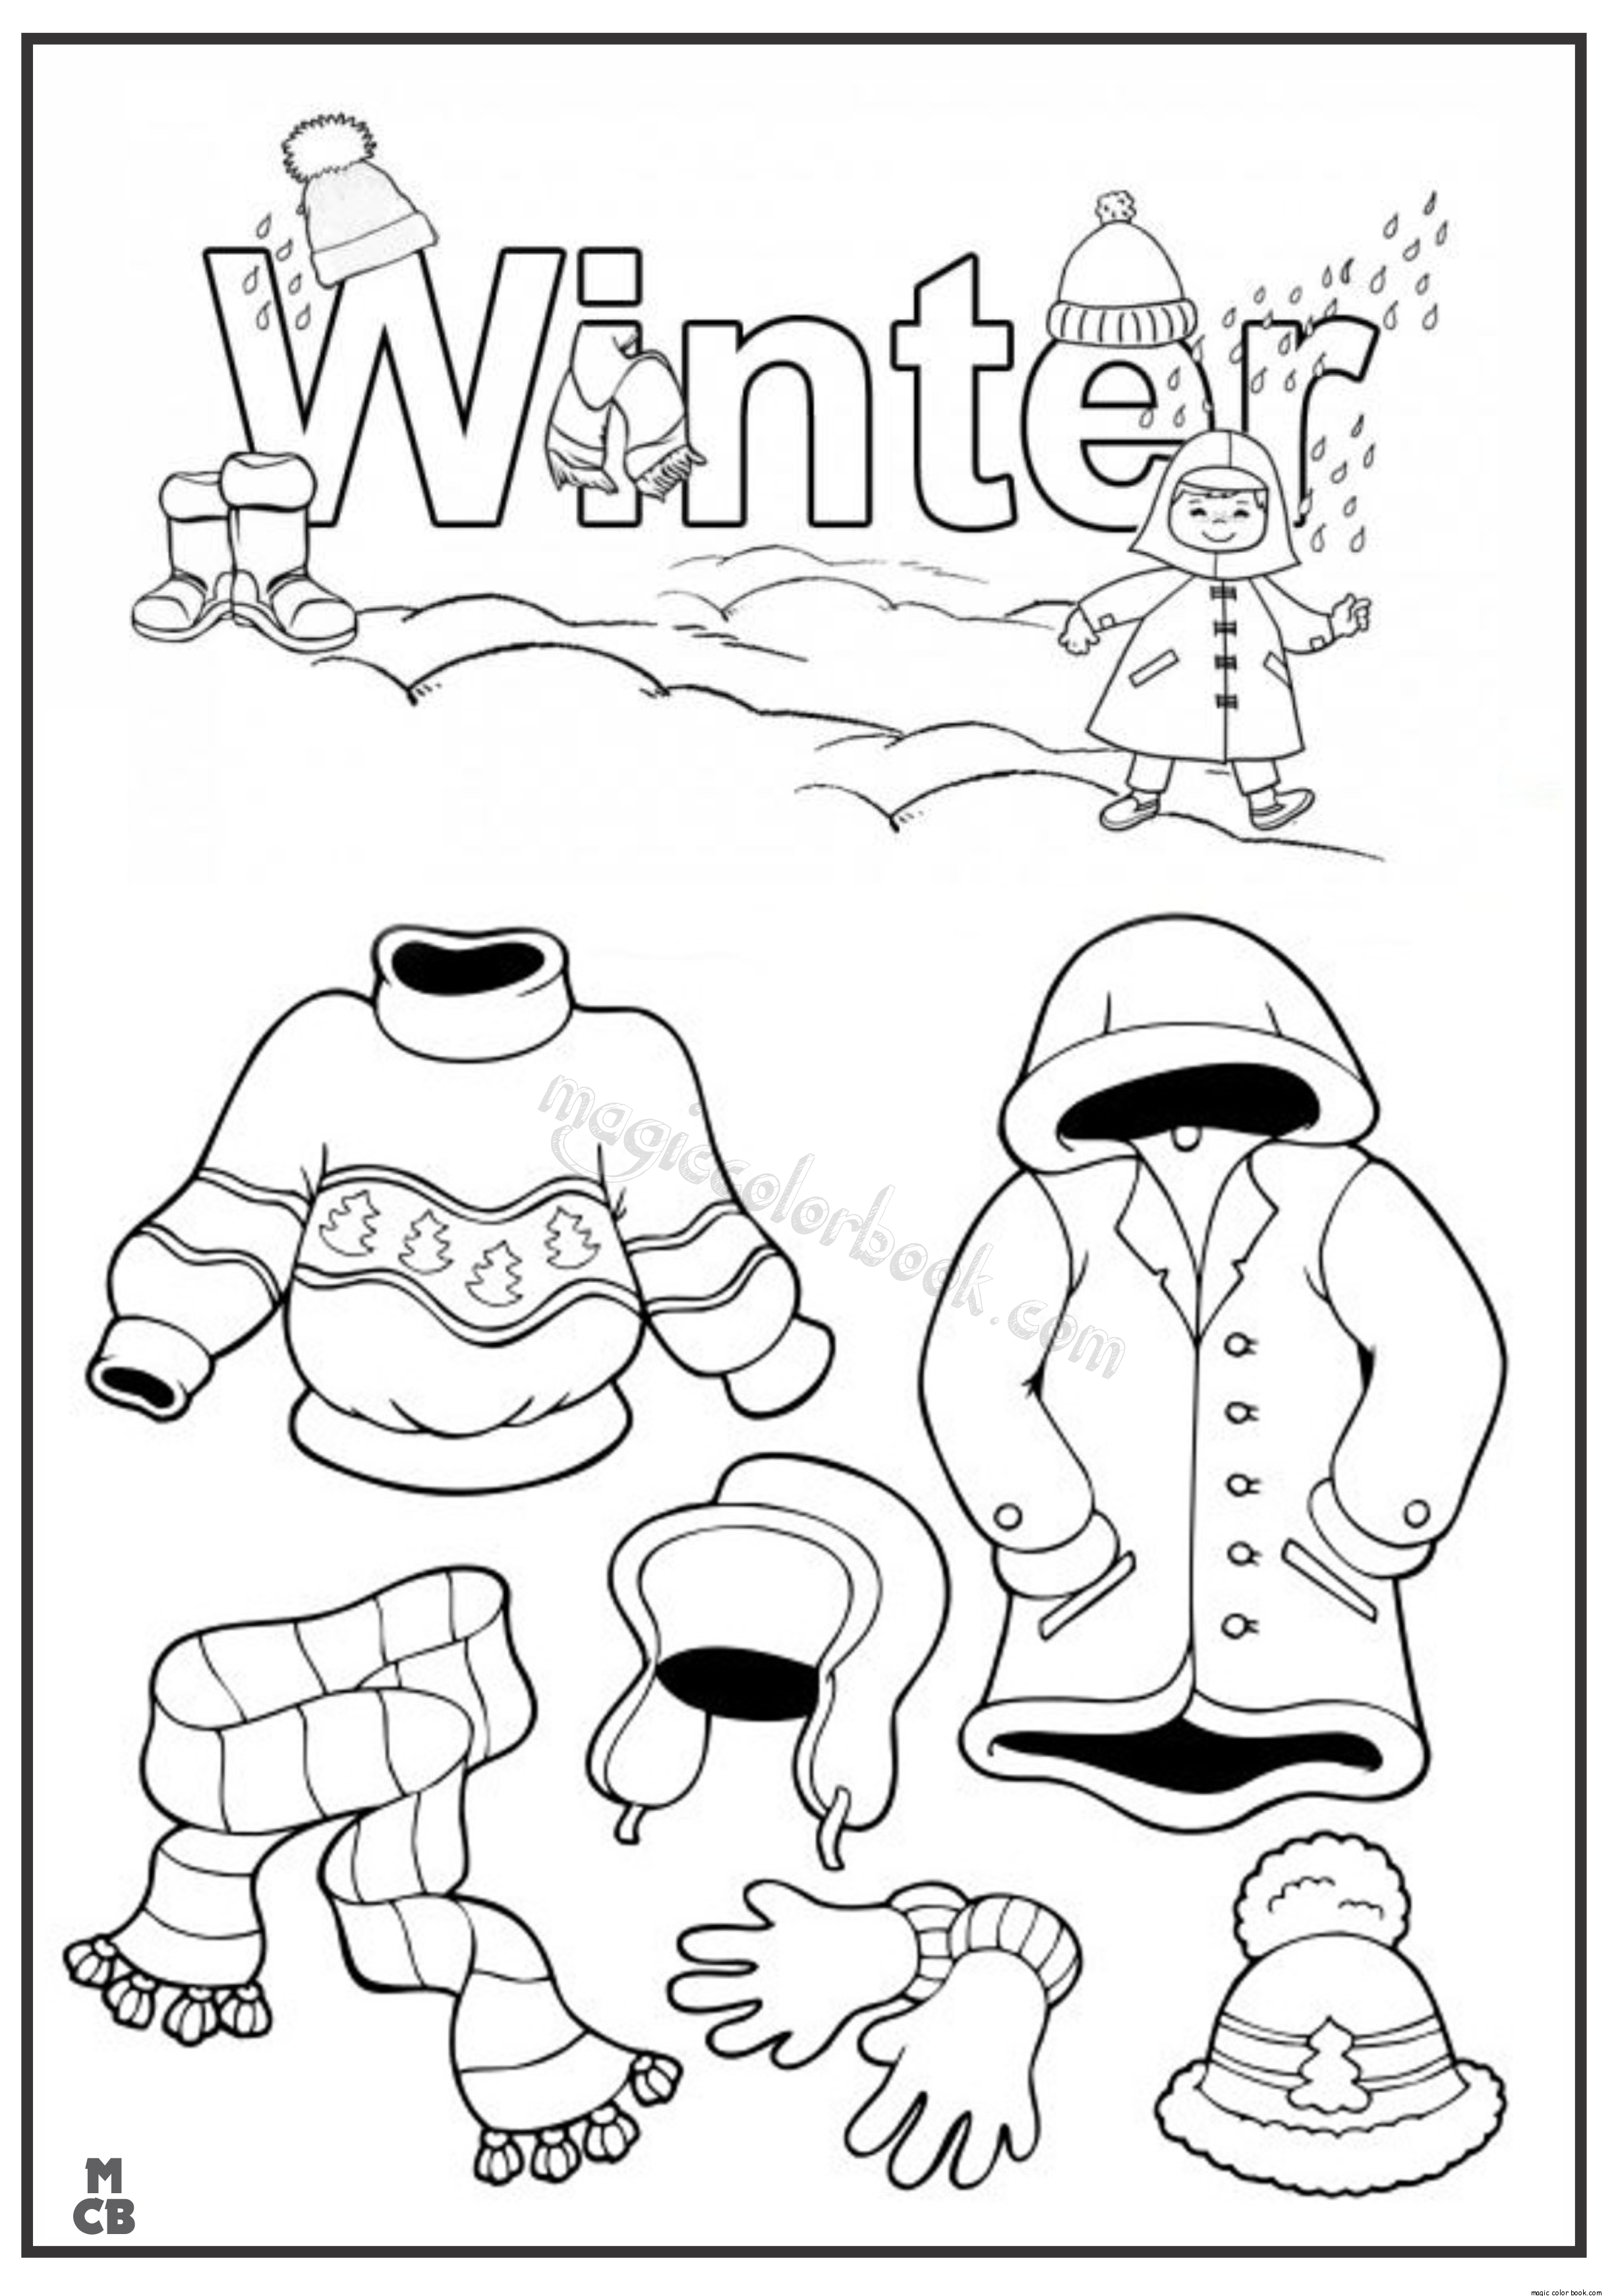 Winter Clothes Coloring Pages at GetDrawings Free download